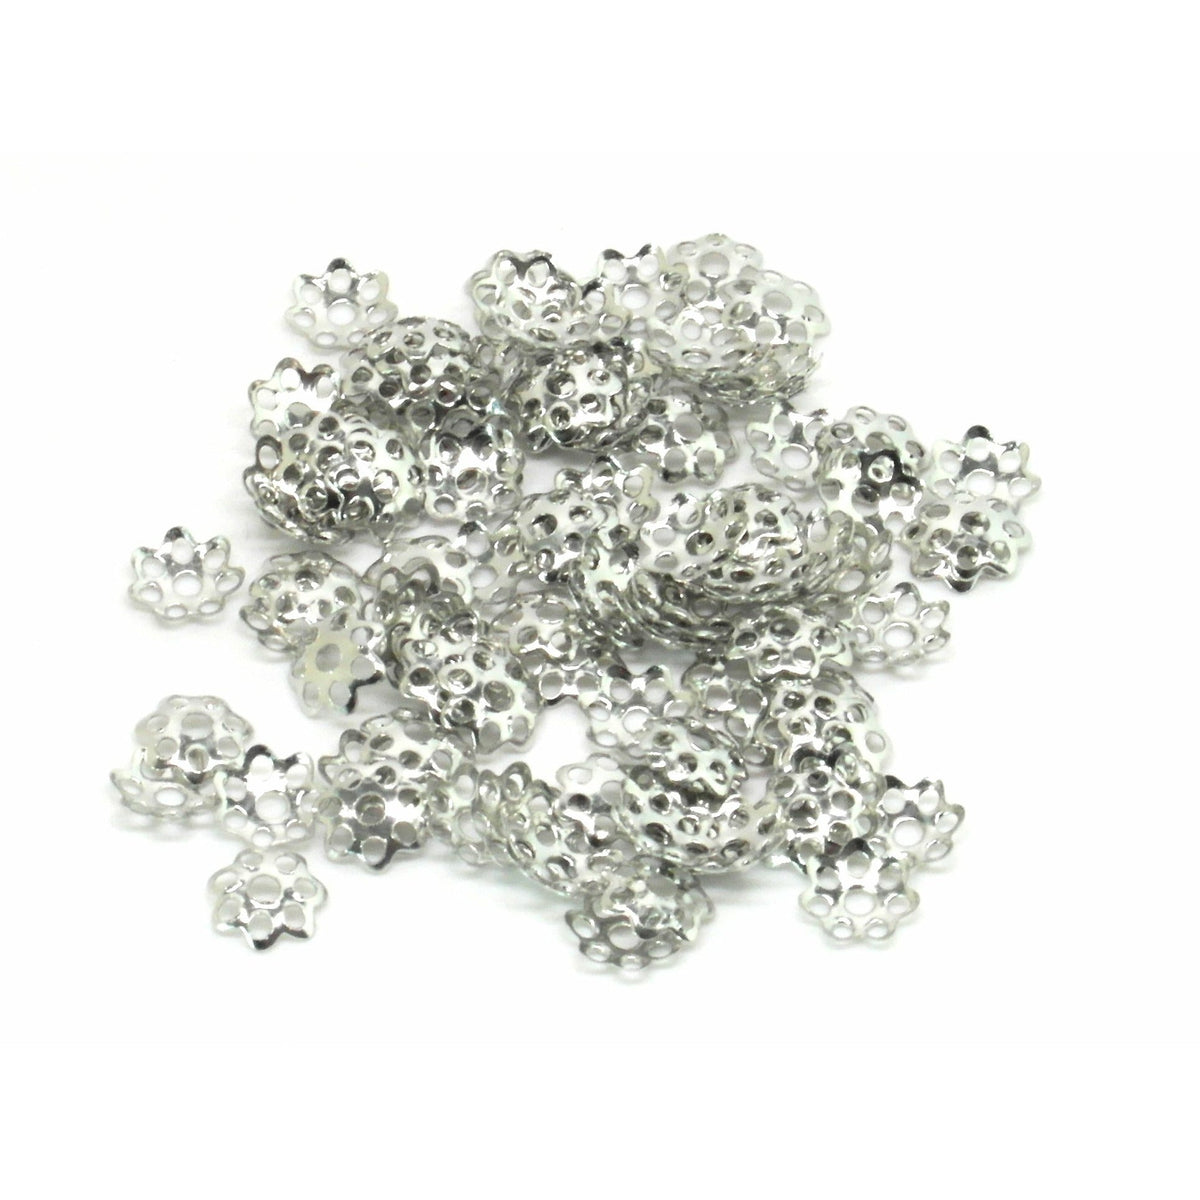 10 Flower Spacer Beads - Antique Silver - 6mm beads – Findings On